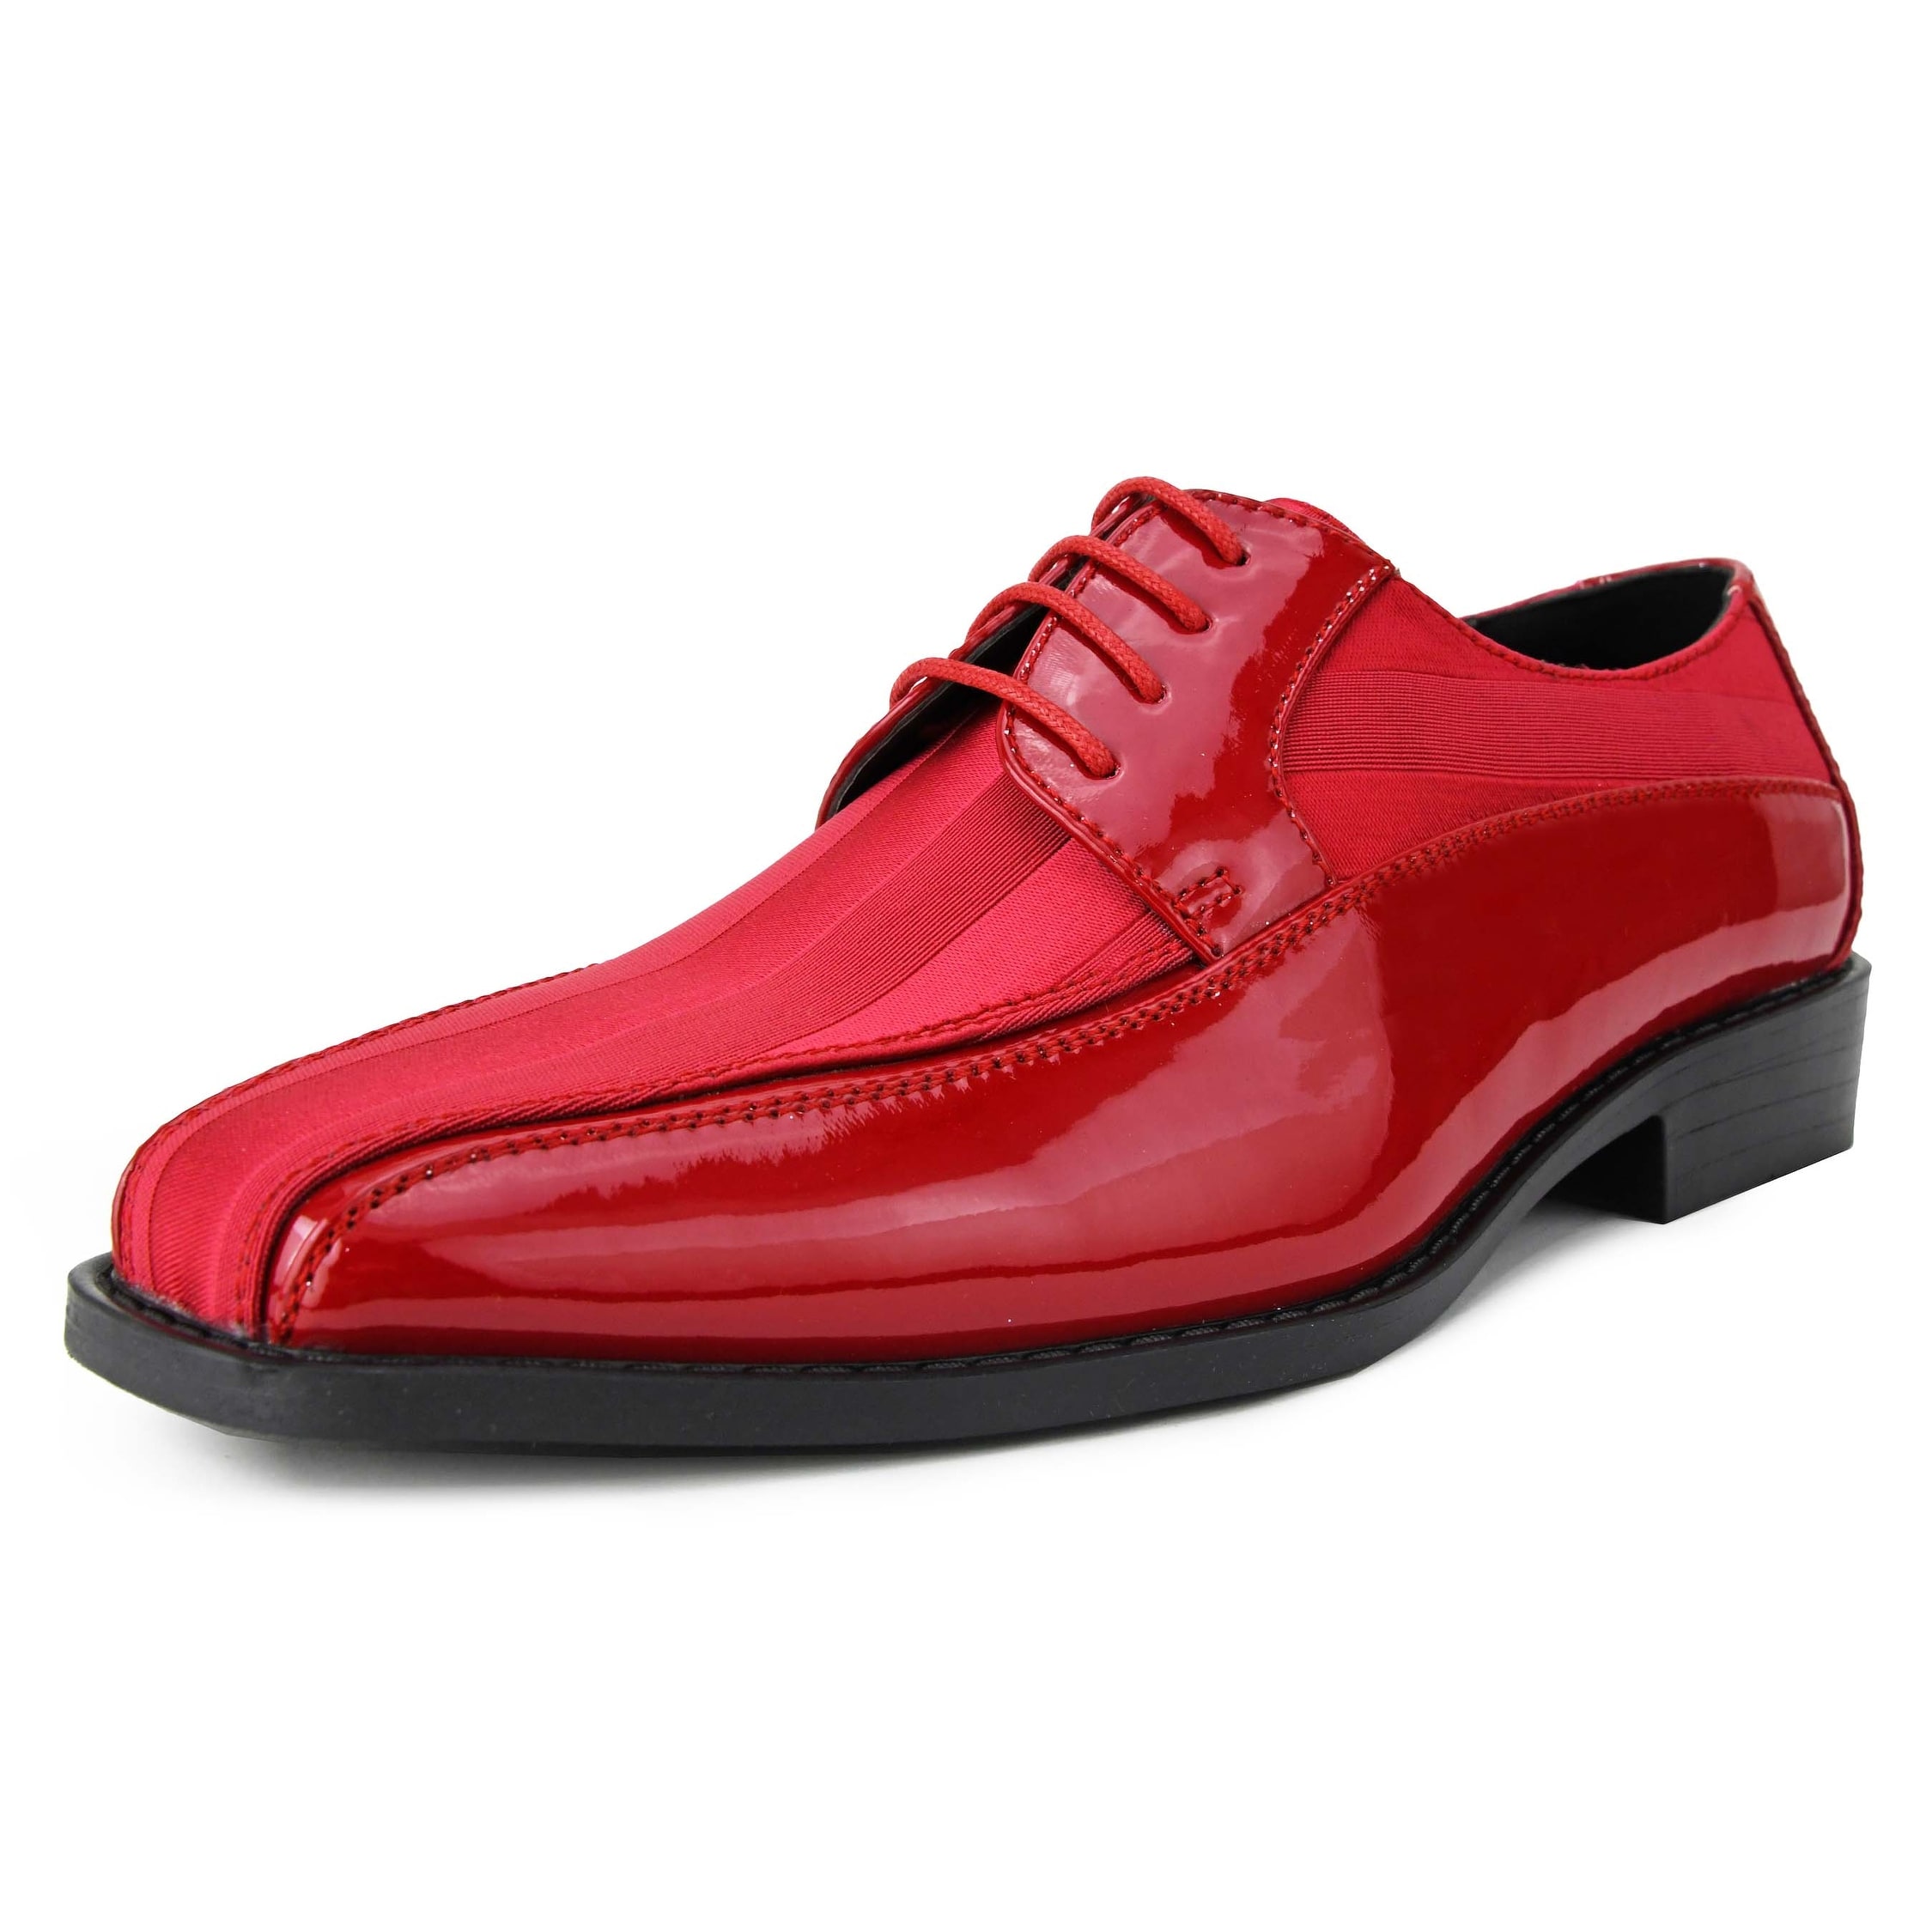 all red dress shoes